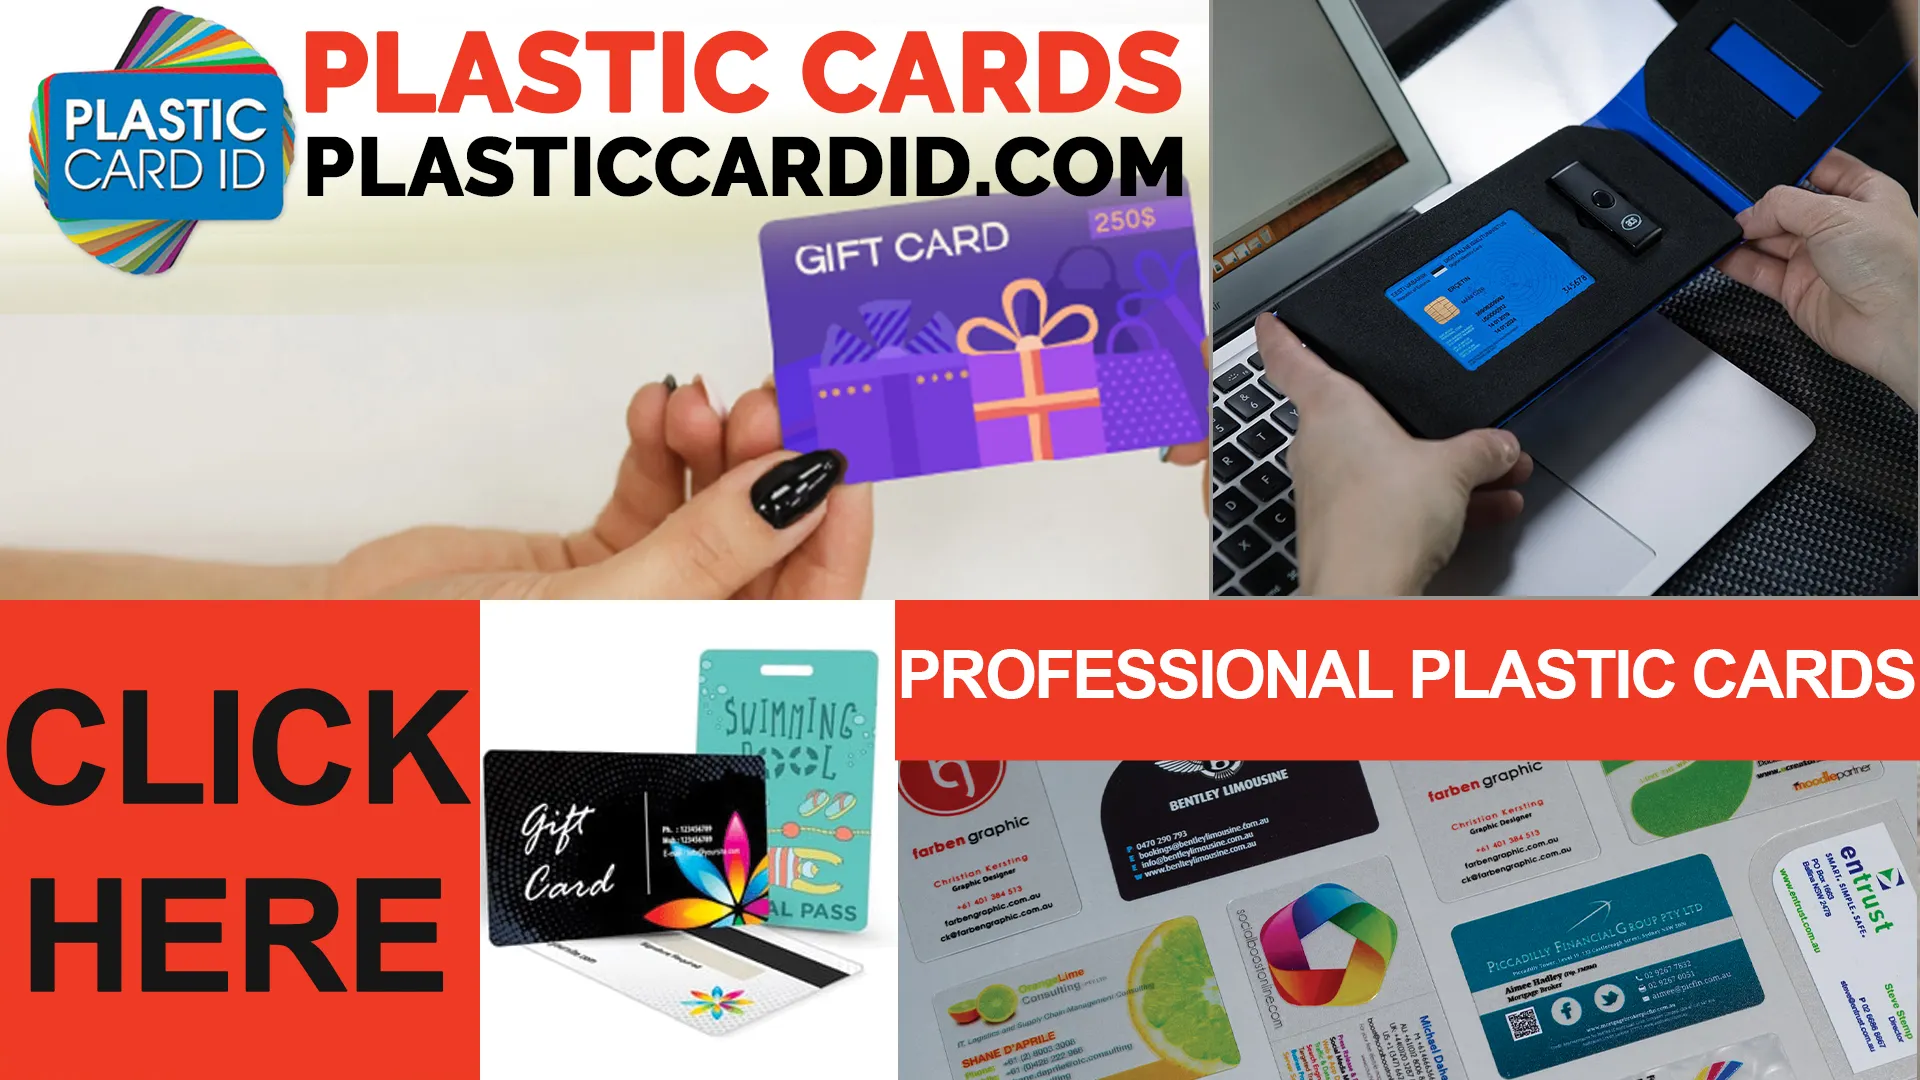 Your Options Are Limitless: Types of Plastic Cards We Offer